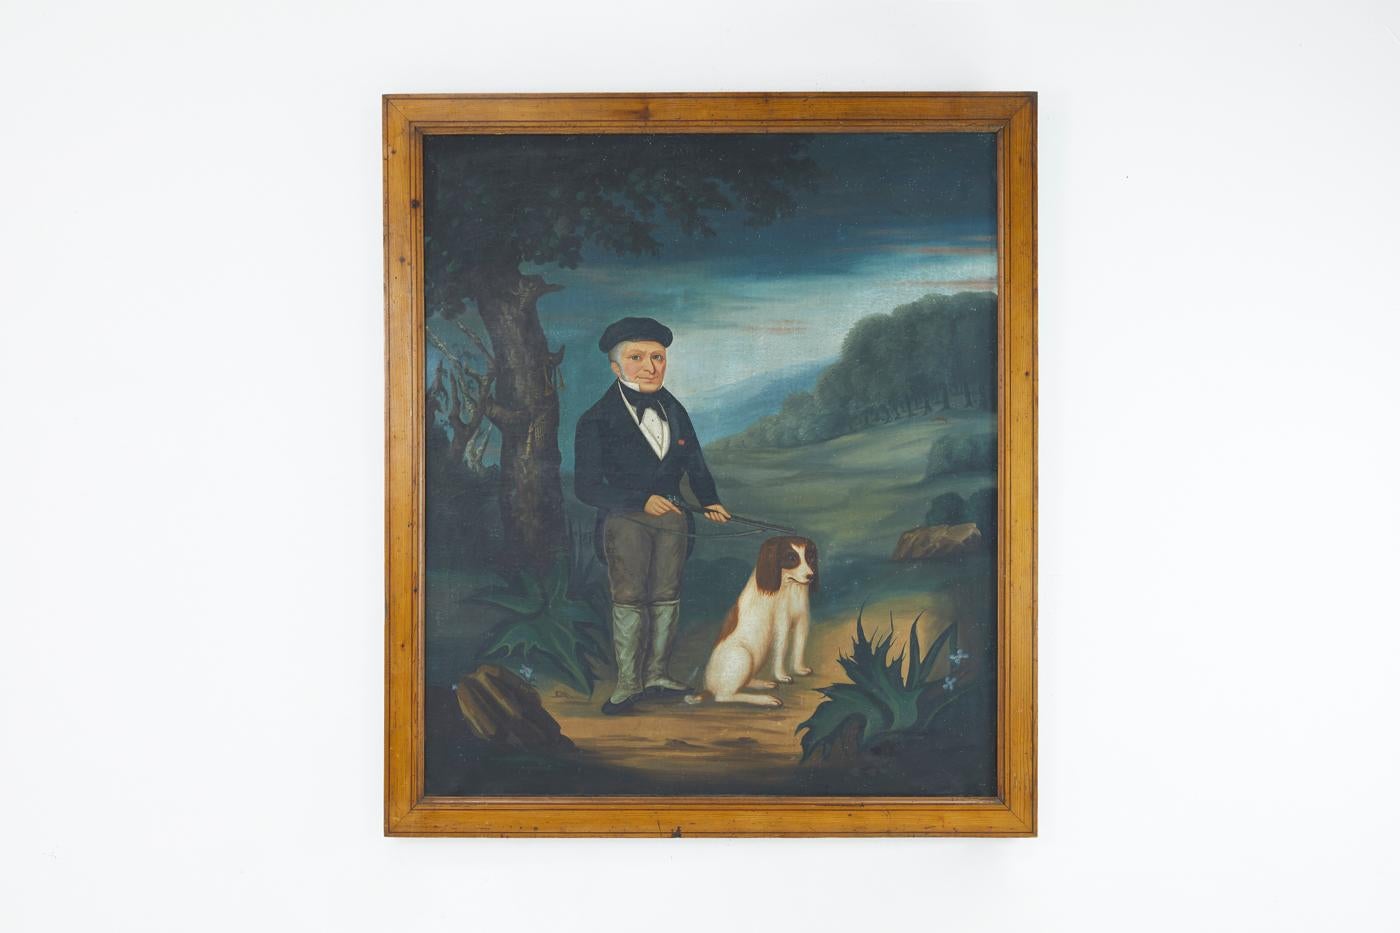 An early 19th century French naive oil on canvas painting of a man and his dog.